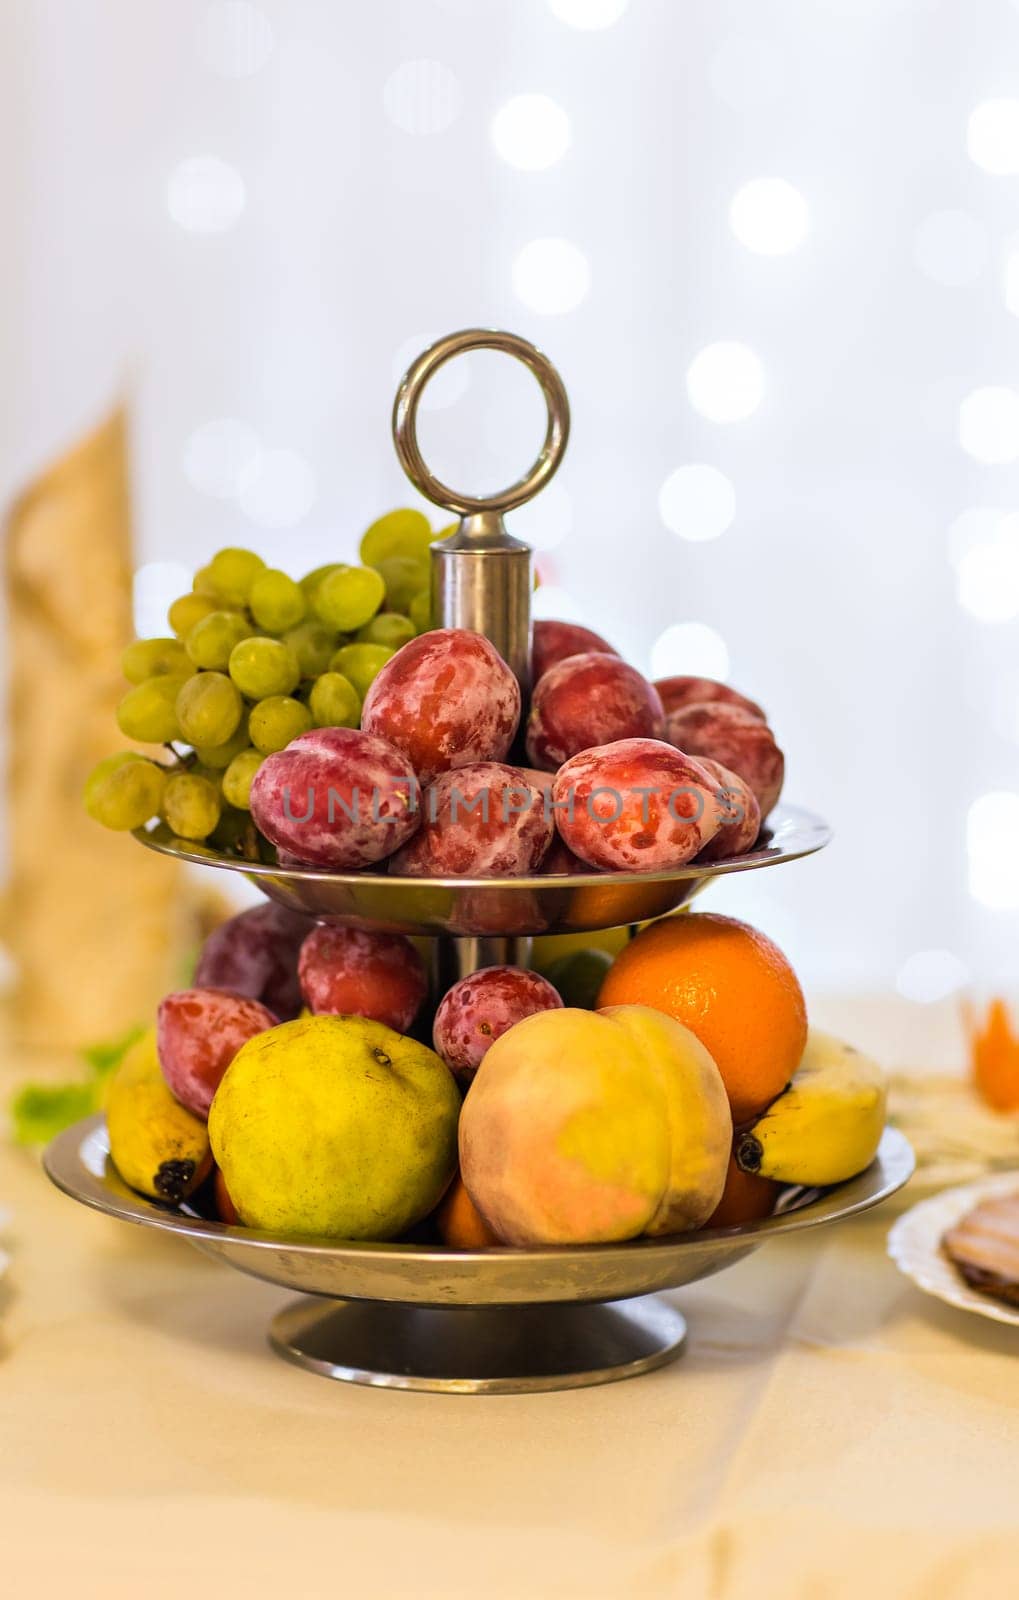 Fresh fruit party plate by Satura86